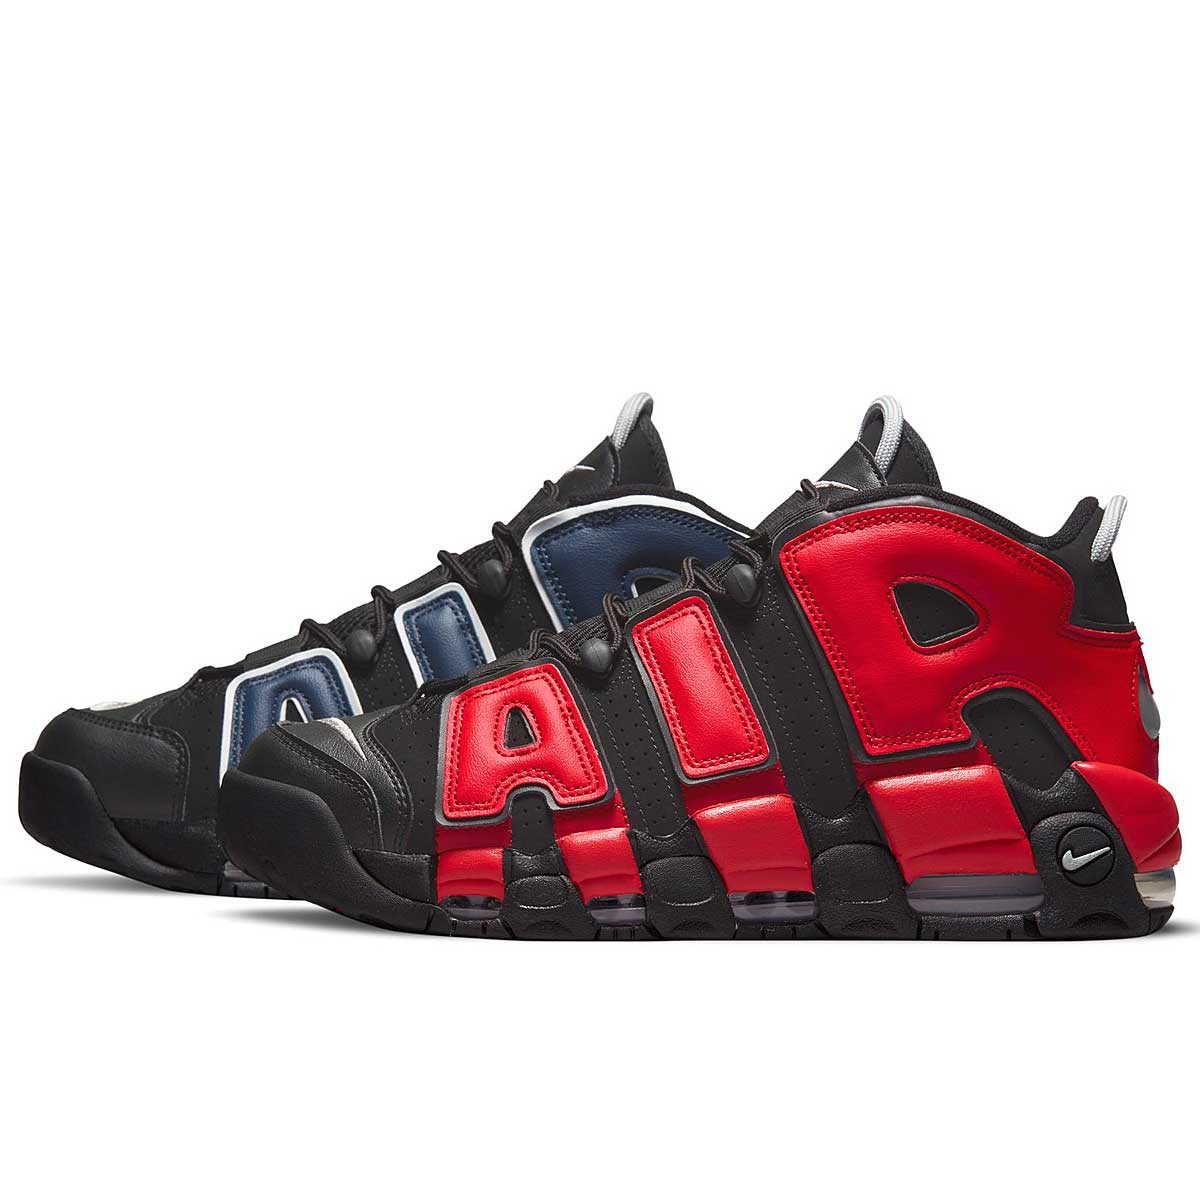 Nike Air Uptempo buy online on